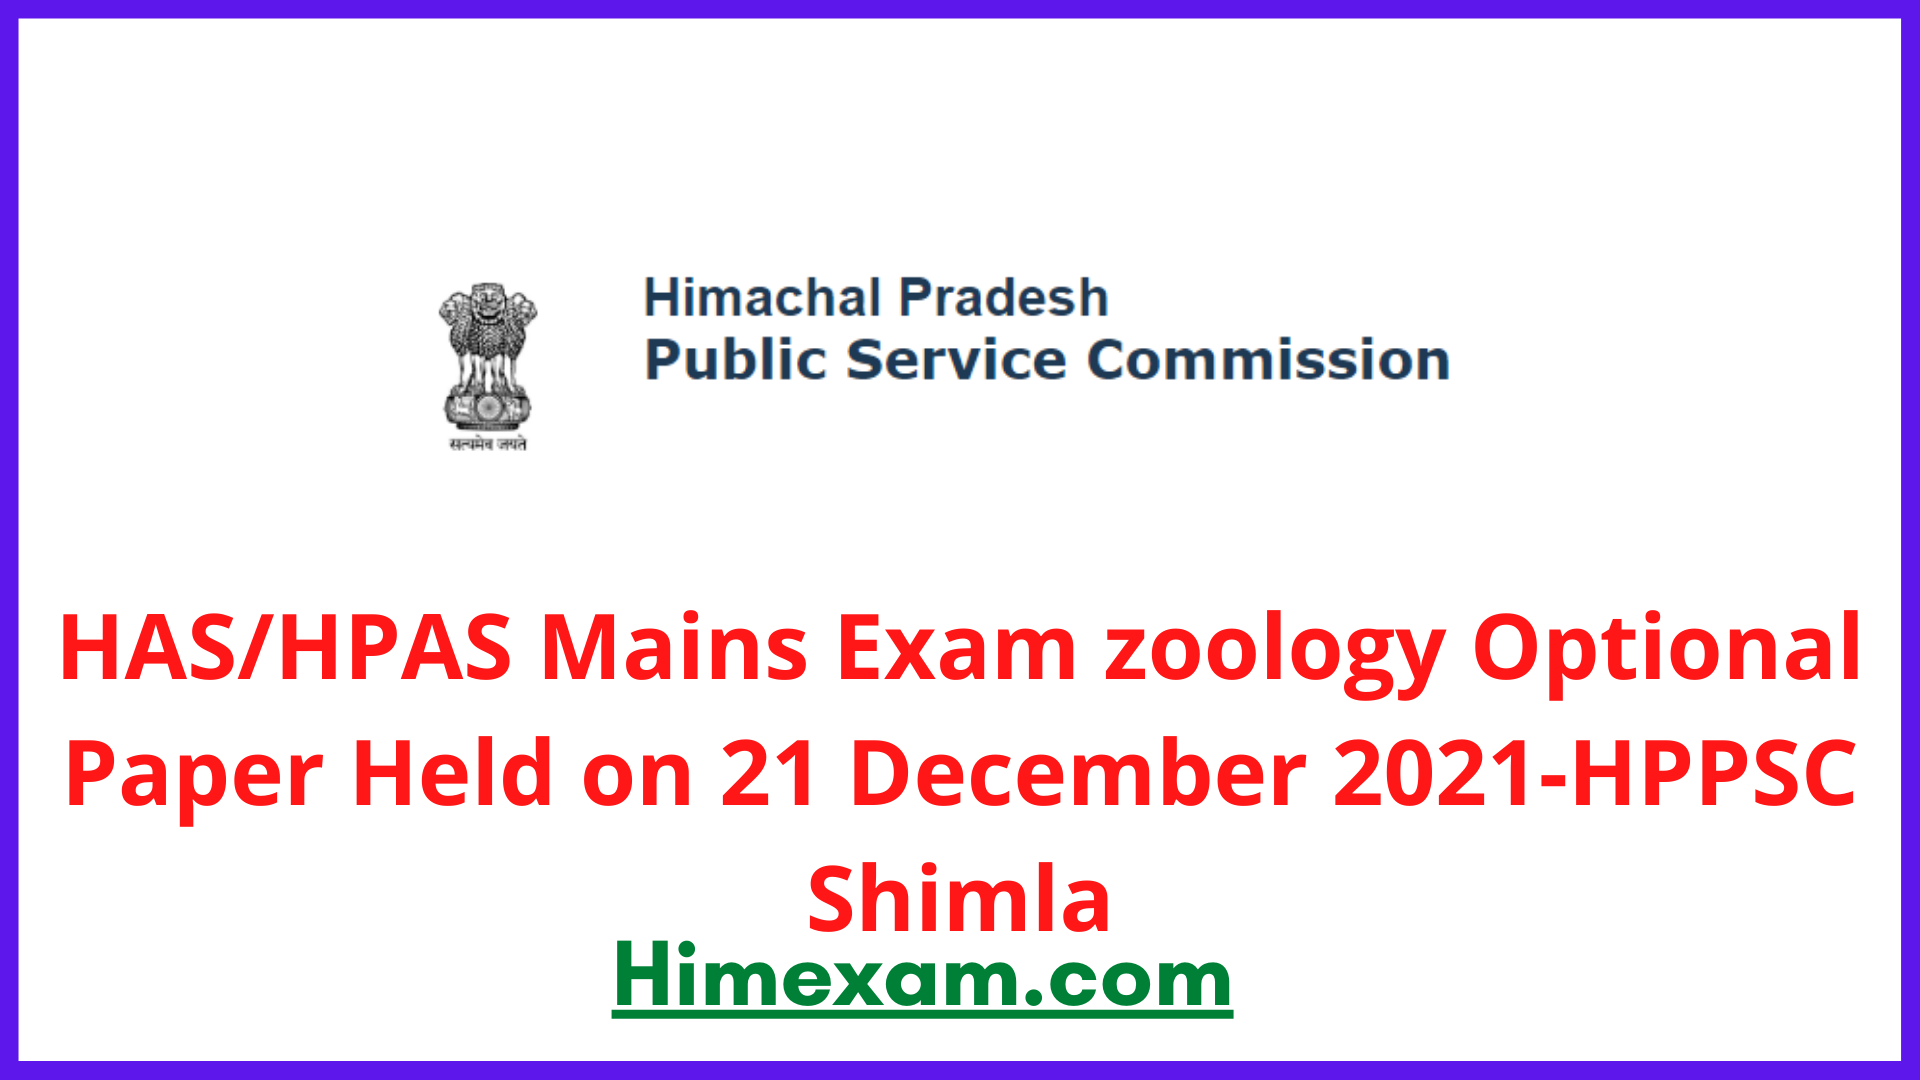 HAS/HPAS Mains Exam zoology Optional Paper Held on 21 December 2021